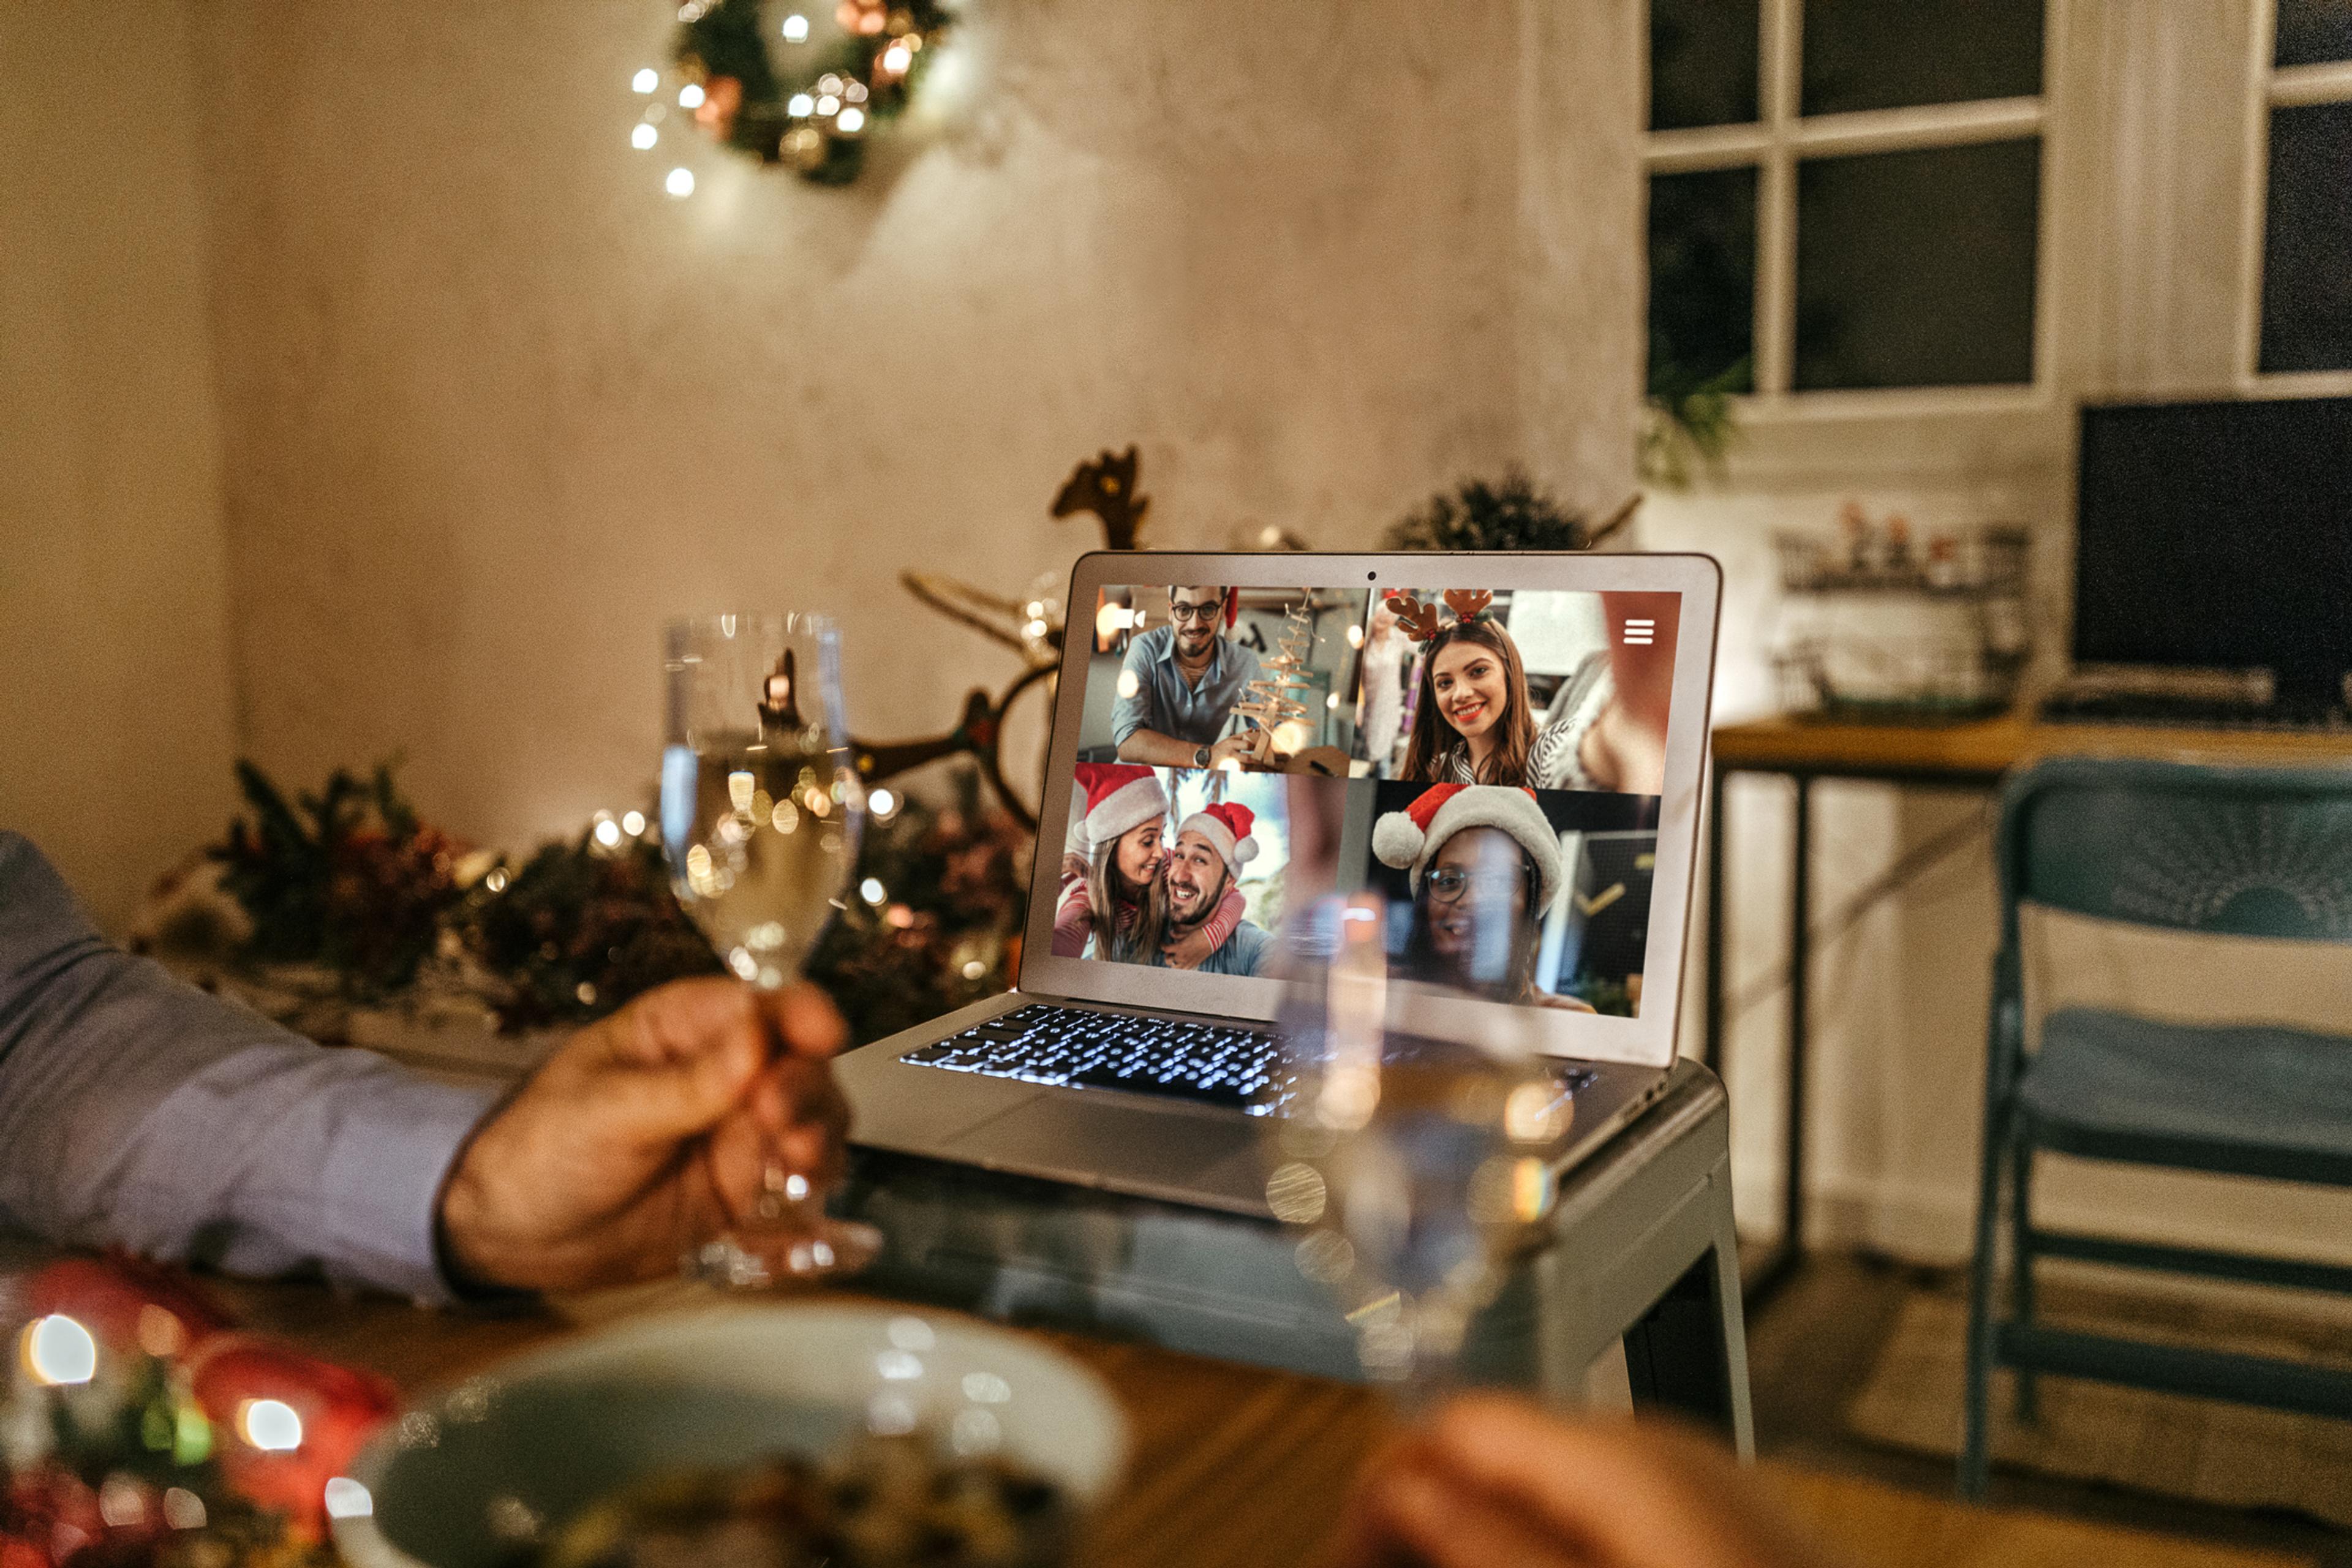 A laptop is resting on a chair with a video call on the screen, the setting is festive with fairy lights and a man in the foreground holding a glass of prosecco.